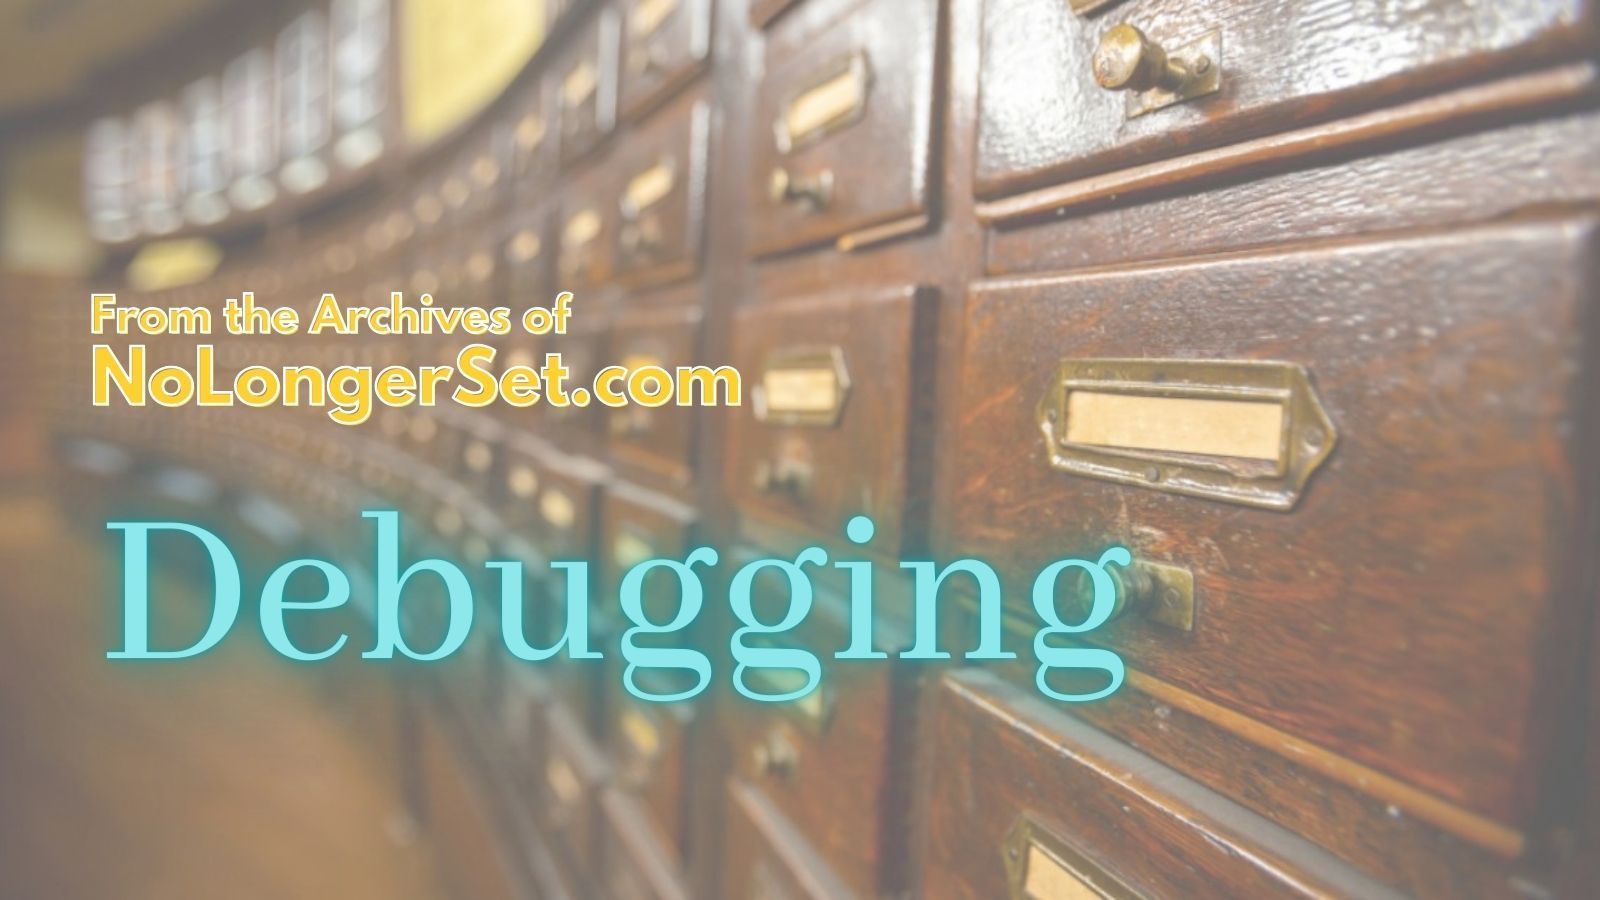 Archive Collection: Debugging